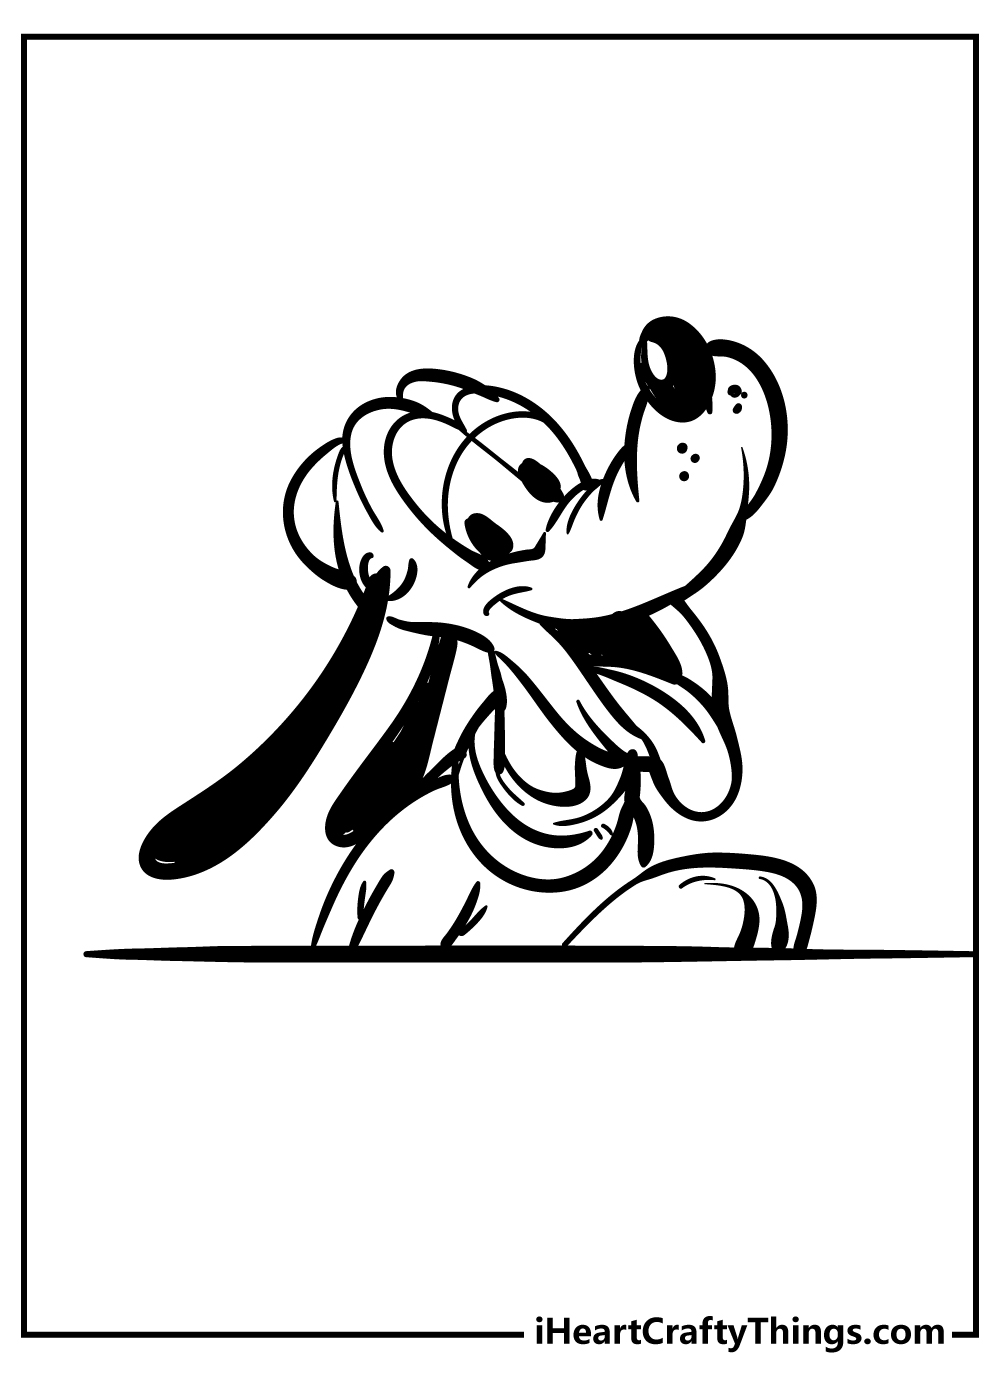 Pluto Coloring Pages for adults free printable